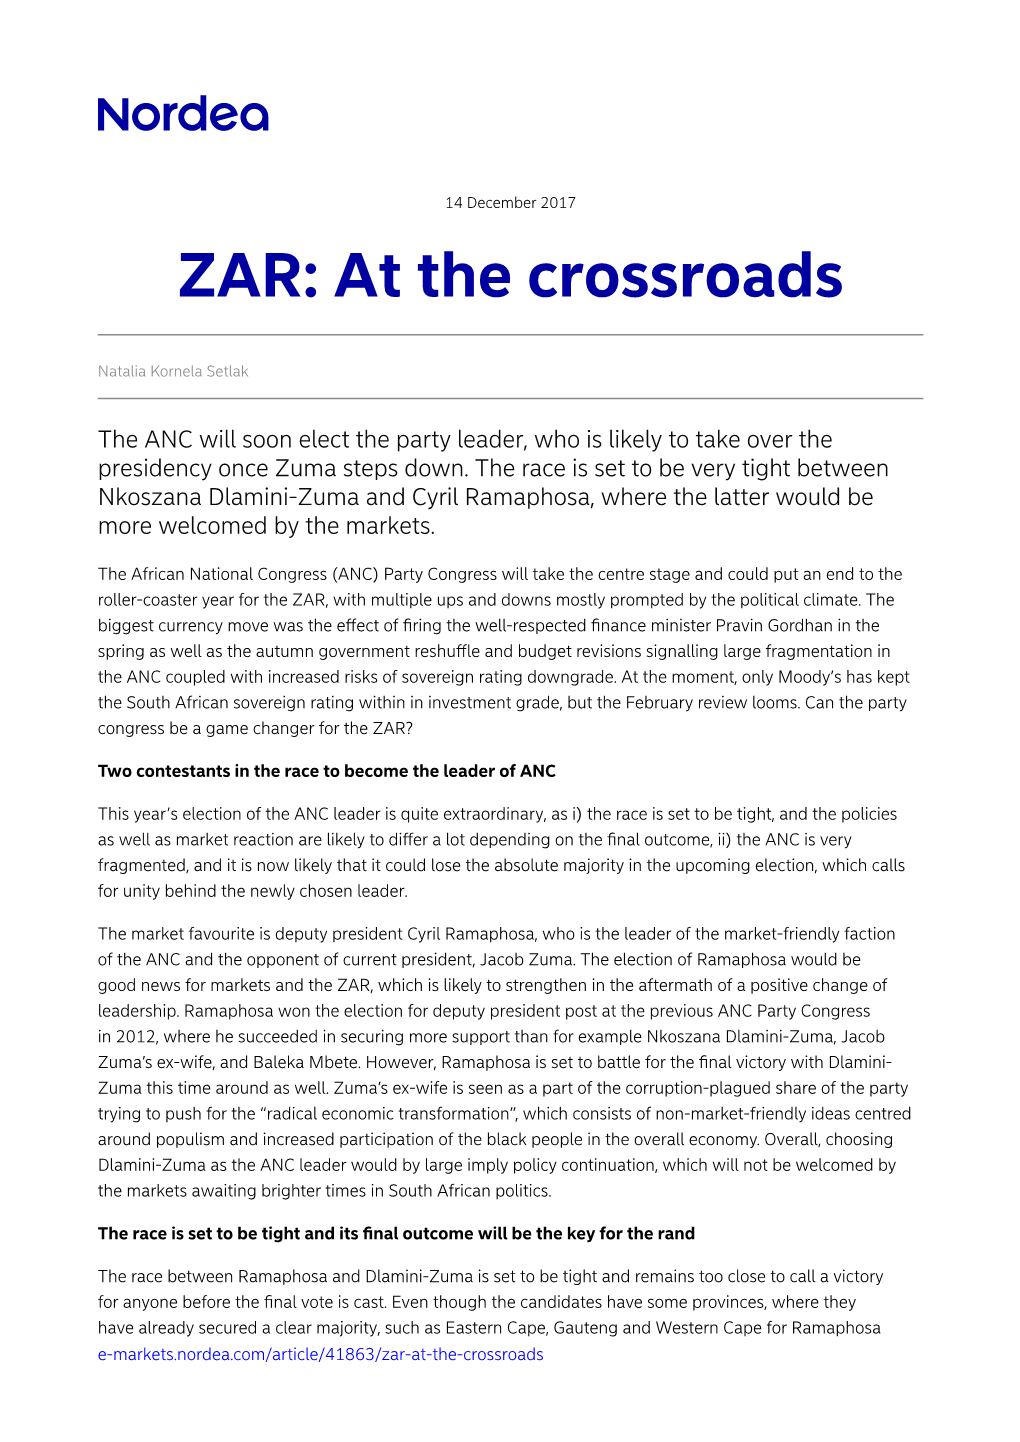 ZAR: at the Crossroads